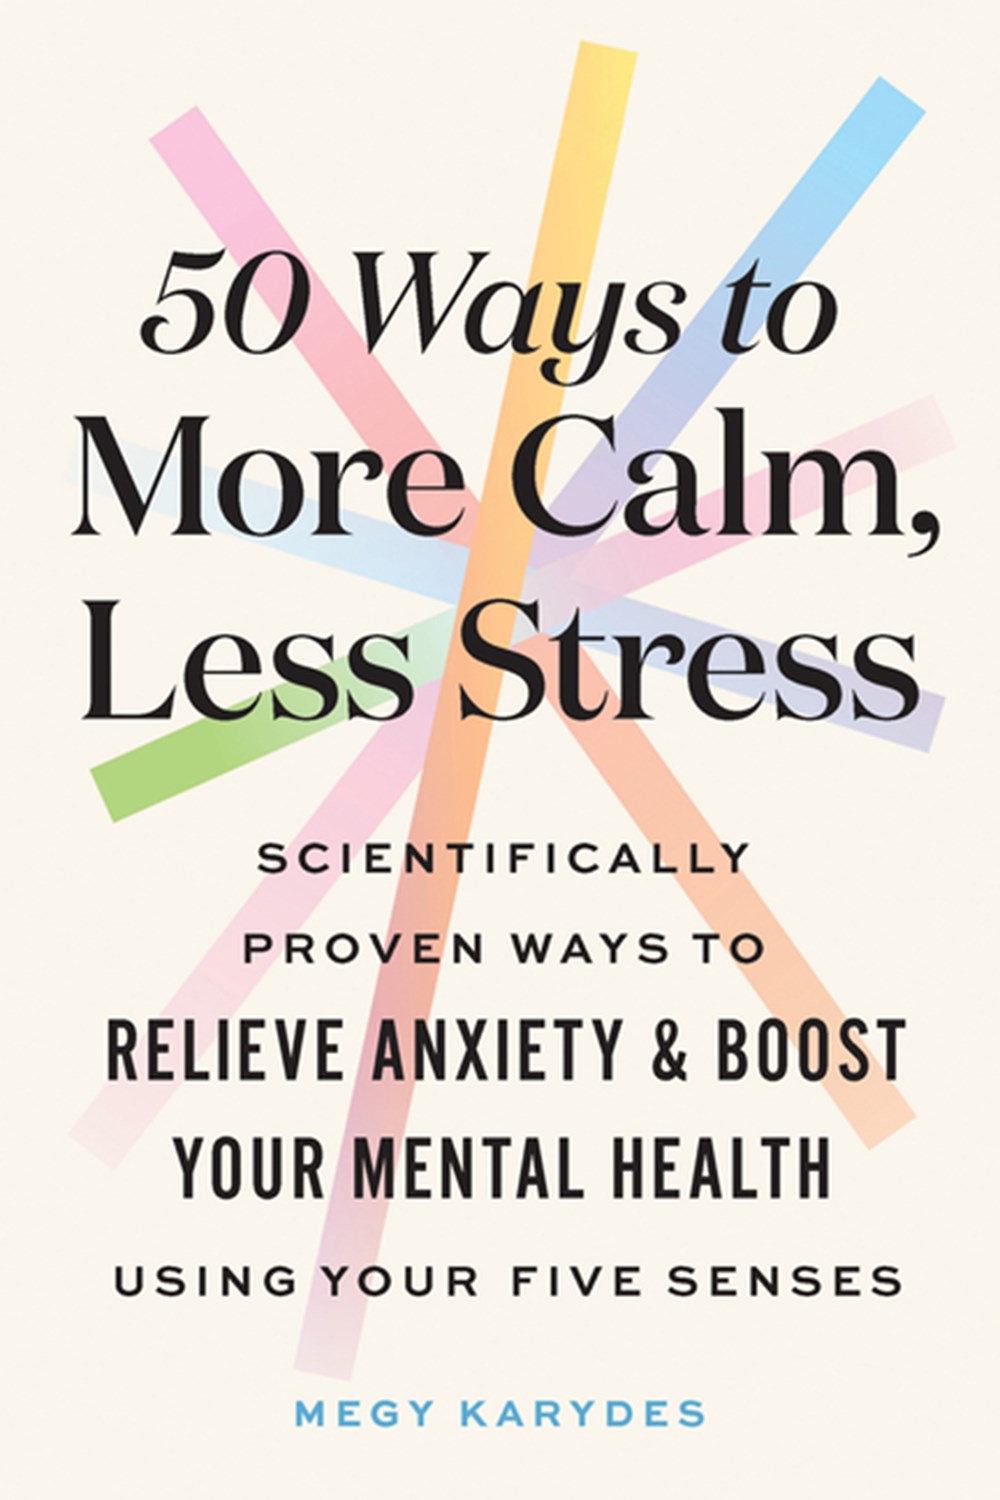 50 Ways to More Calm, Less Stress: Scientifically Proven Ways to Relieve Anxiety and Boost Your Ment